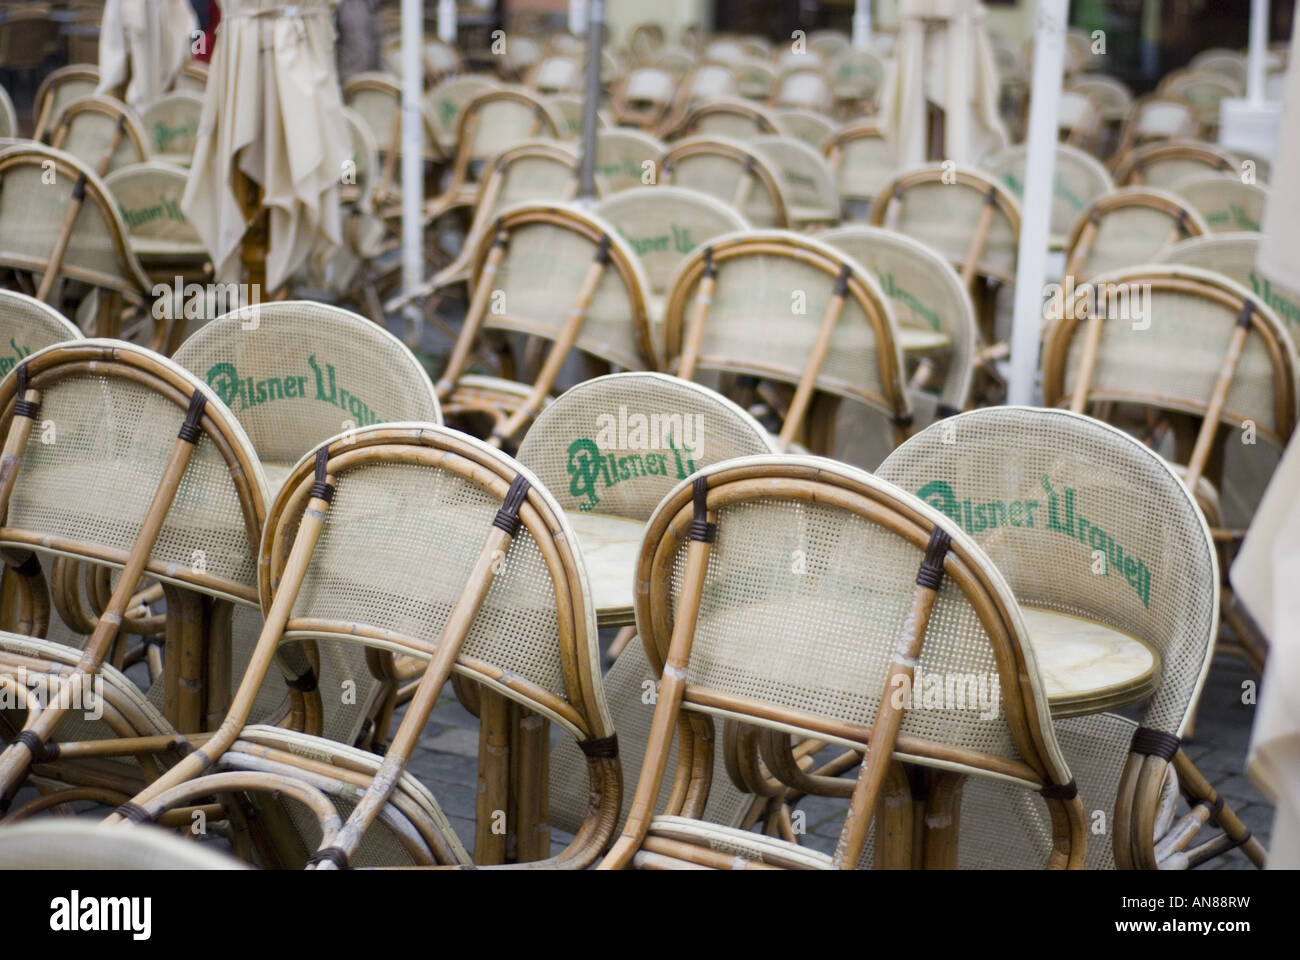 Chairs stacked against cafe tables in Prague's Old Town Square, Czech Republic. Stock Photo